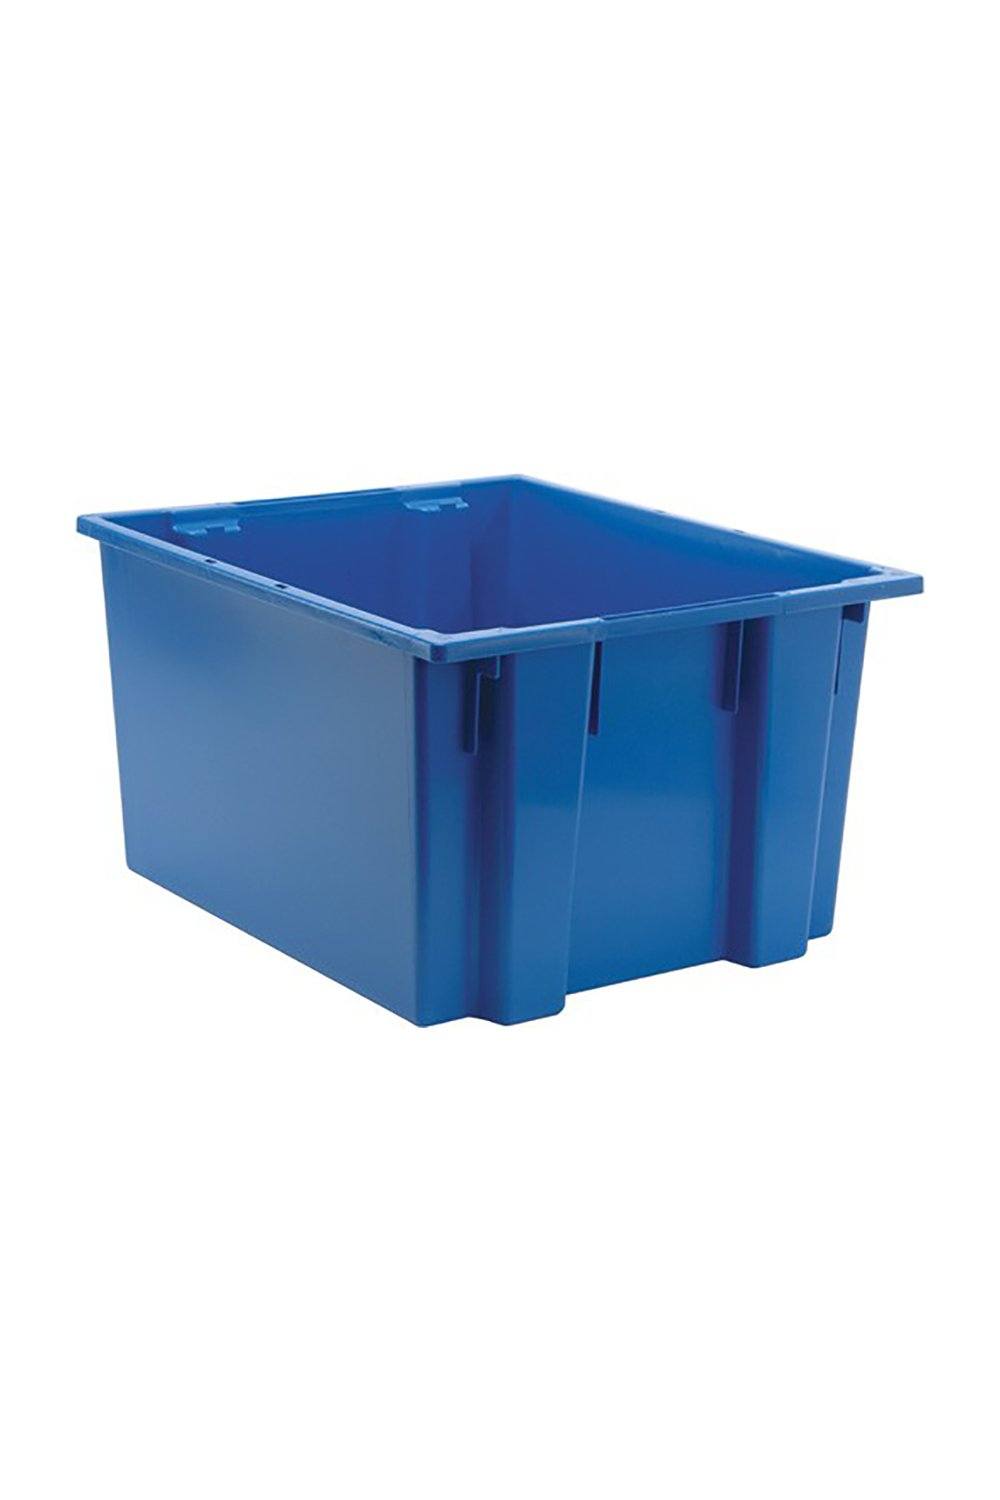 Stack and Nest Tote Bins & Containers Acart 23-1/2"L x 19-1/2"W x 13"H Blue 